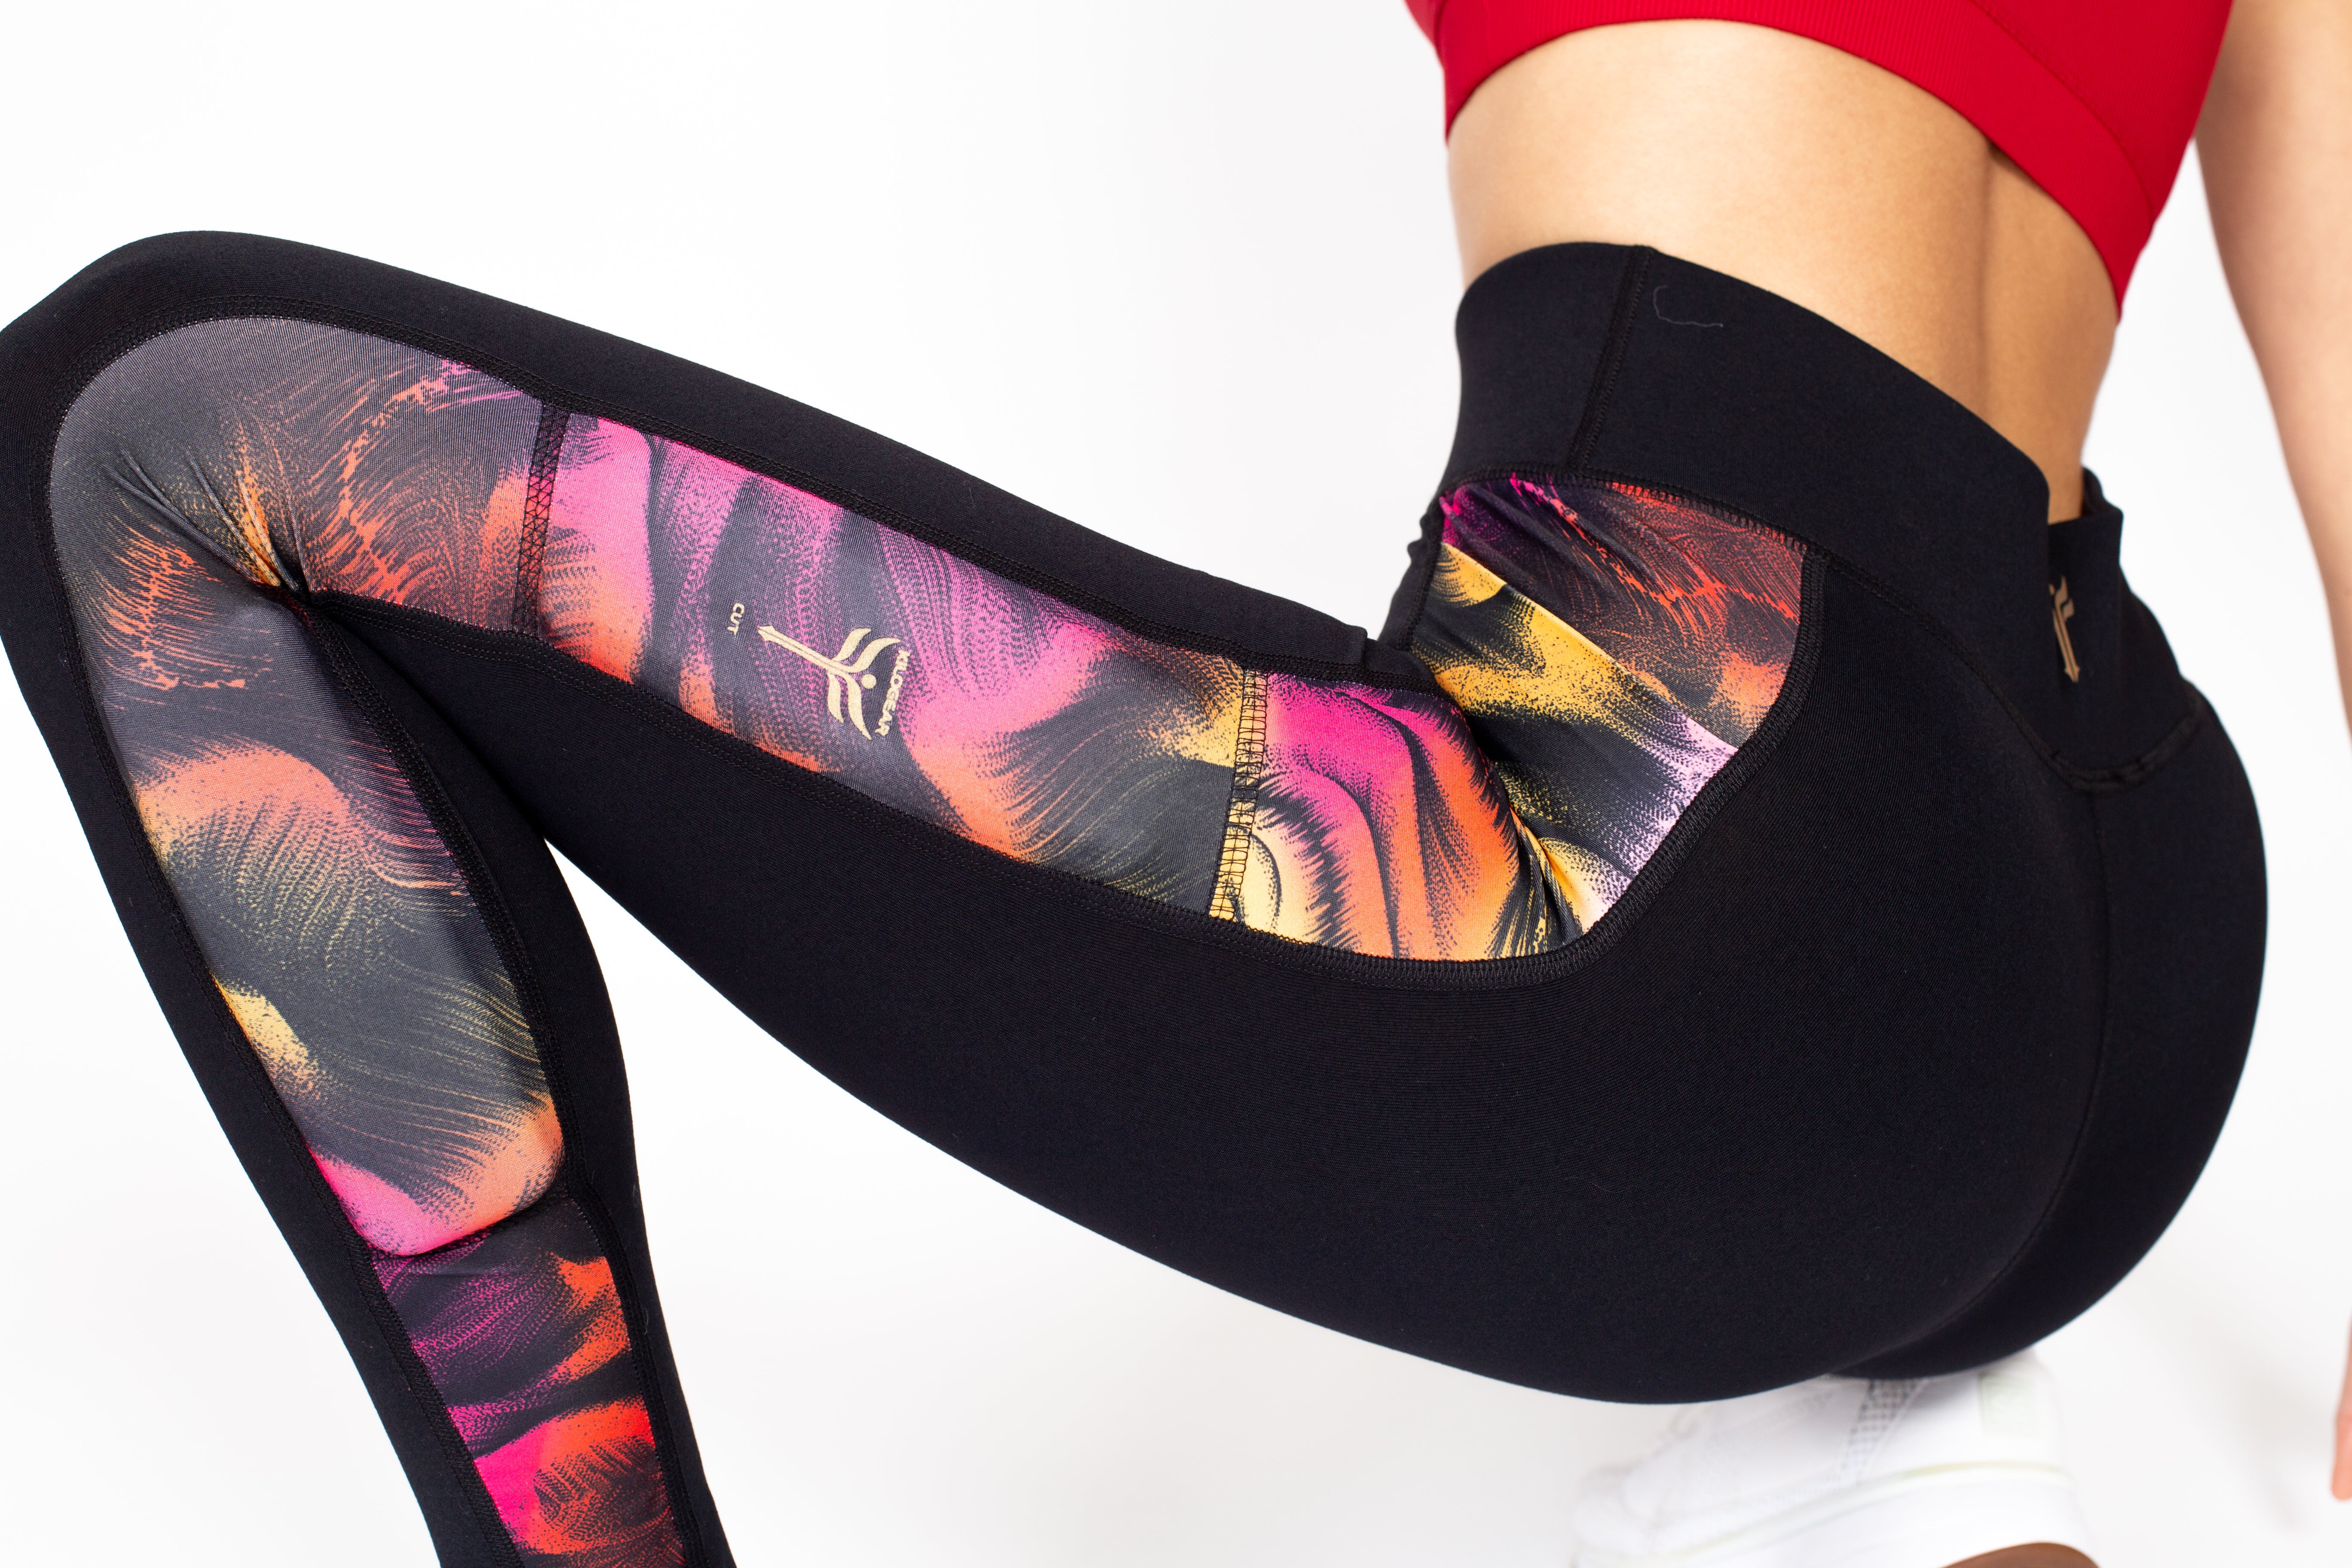 up close picture with woman crouched down and knees bent, wearing black kilogear cut legging with colorful strip down the leg, called passion fruit. Reds, yellows, pink and orange swirls.Showing weight in the calf weight pocket and quad weight pocket, side view